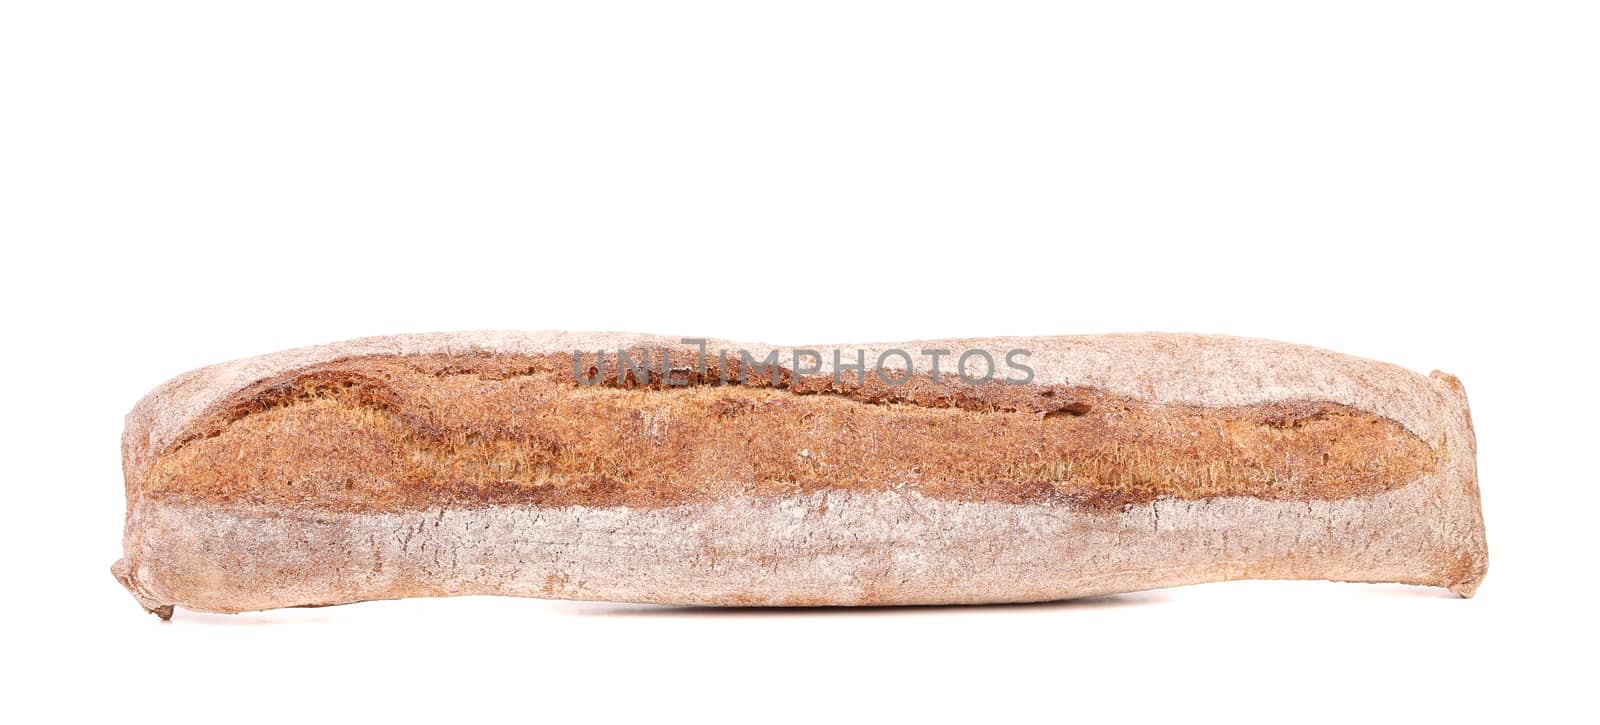 Long loaf.  Isolated on a white background